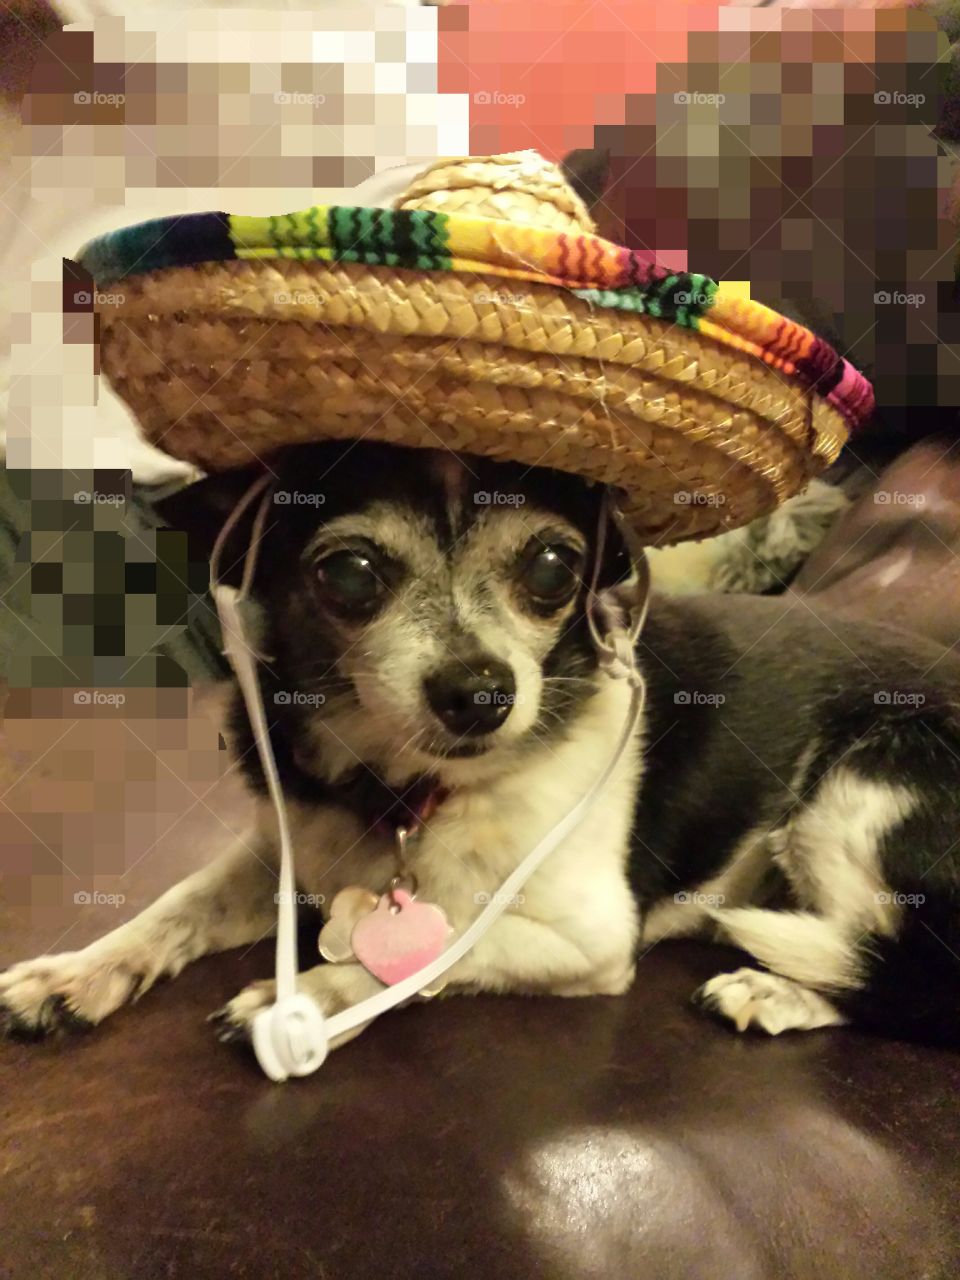 Mexican hat. Chihuahua wearing a Mexican hat